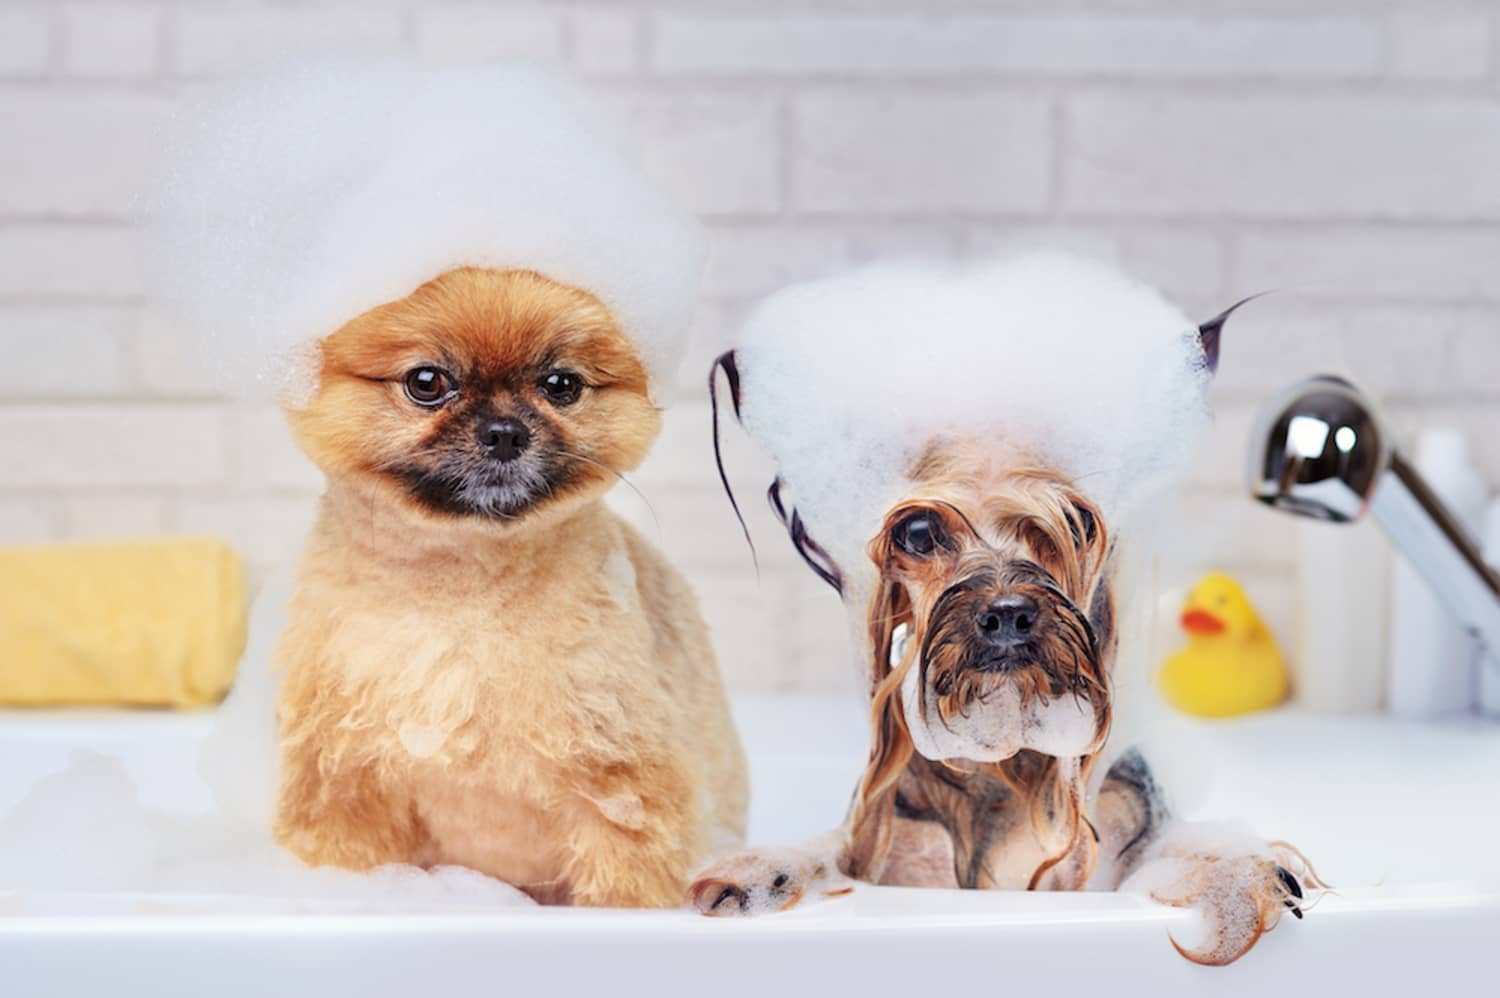 The Dos and Don’ts of Dog Grooming at Home, According to Experts